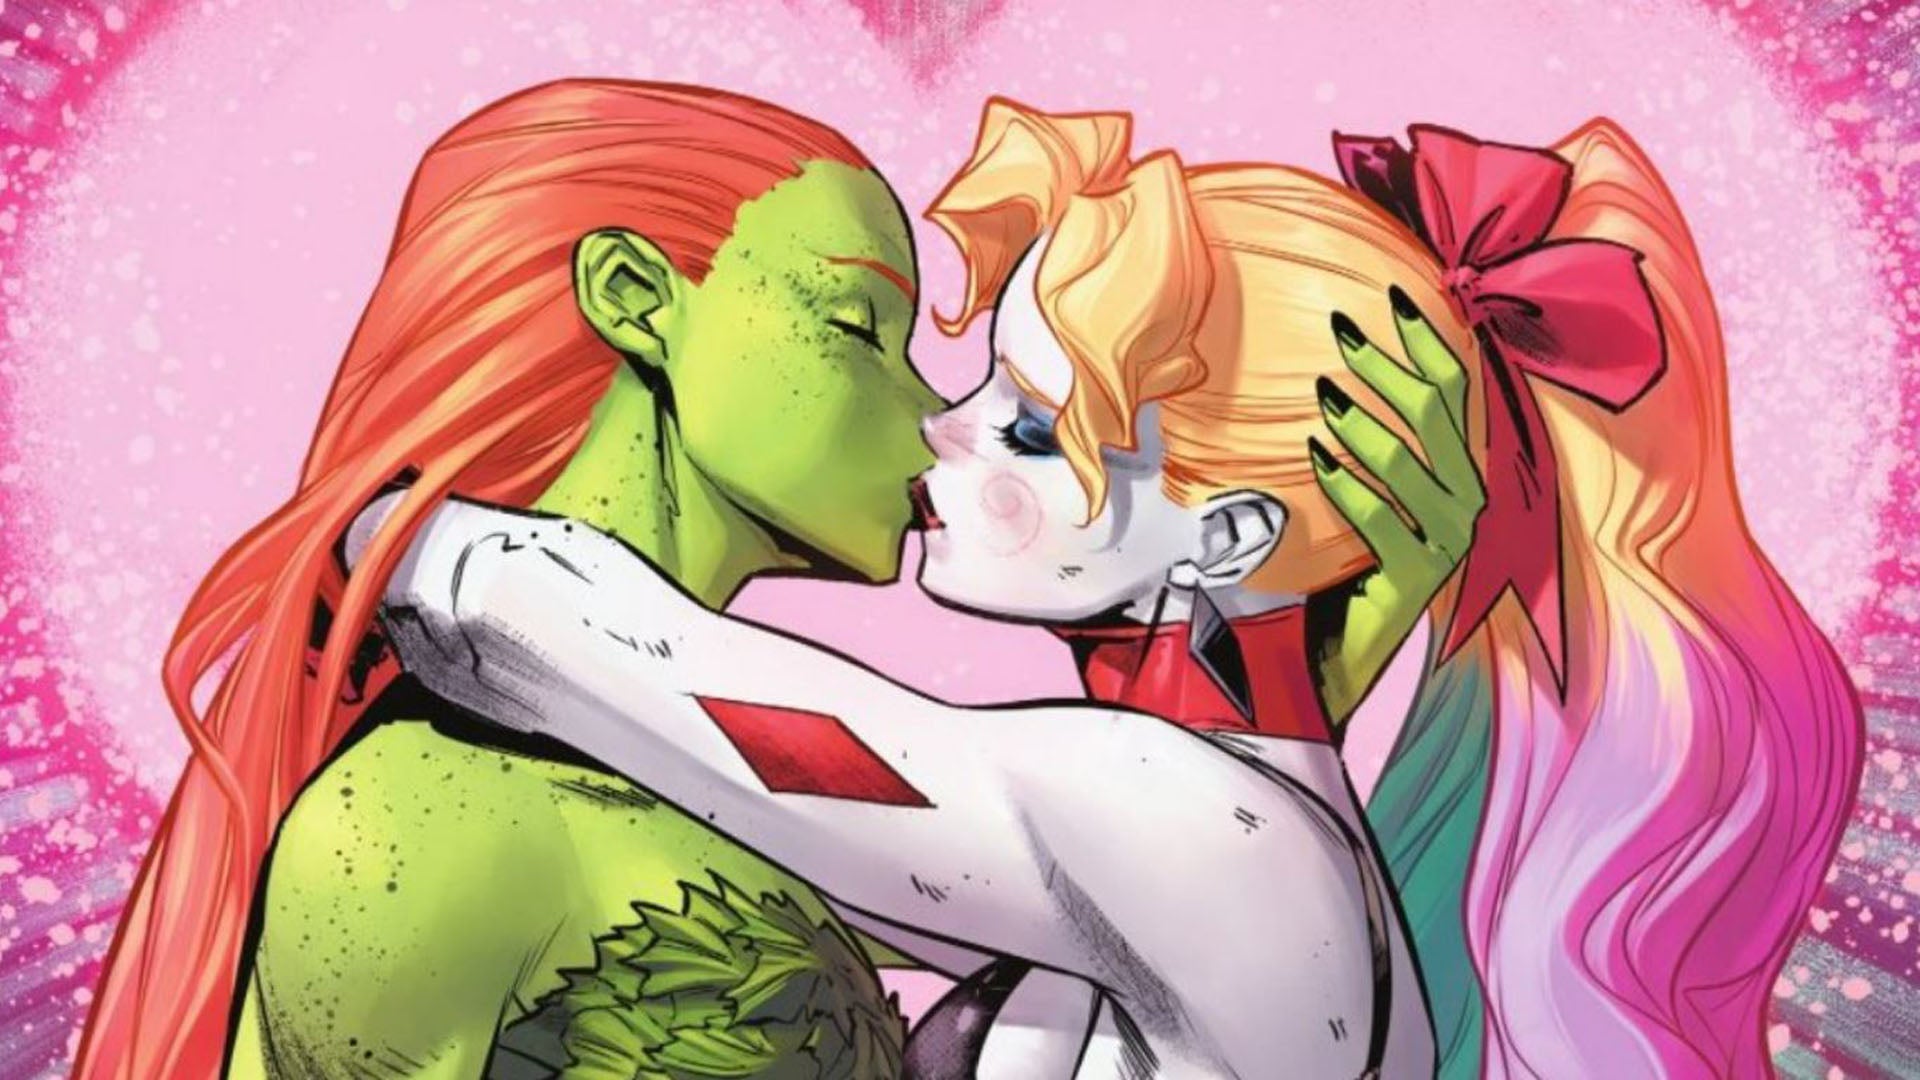 Poison Ivy and Harley Quinn kiss